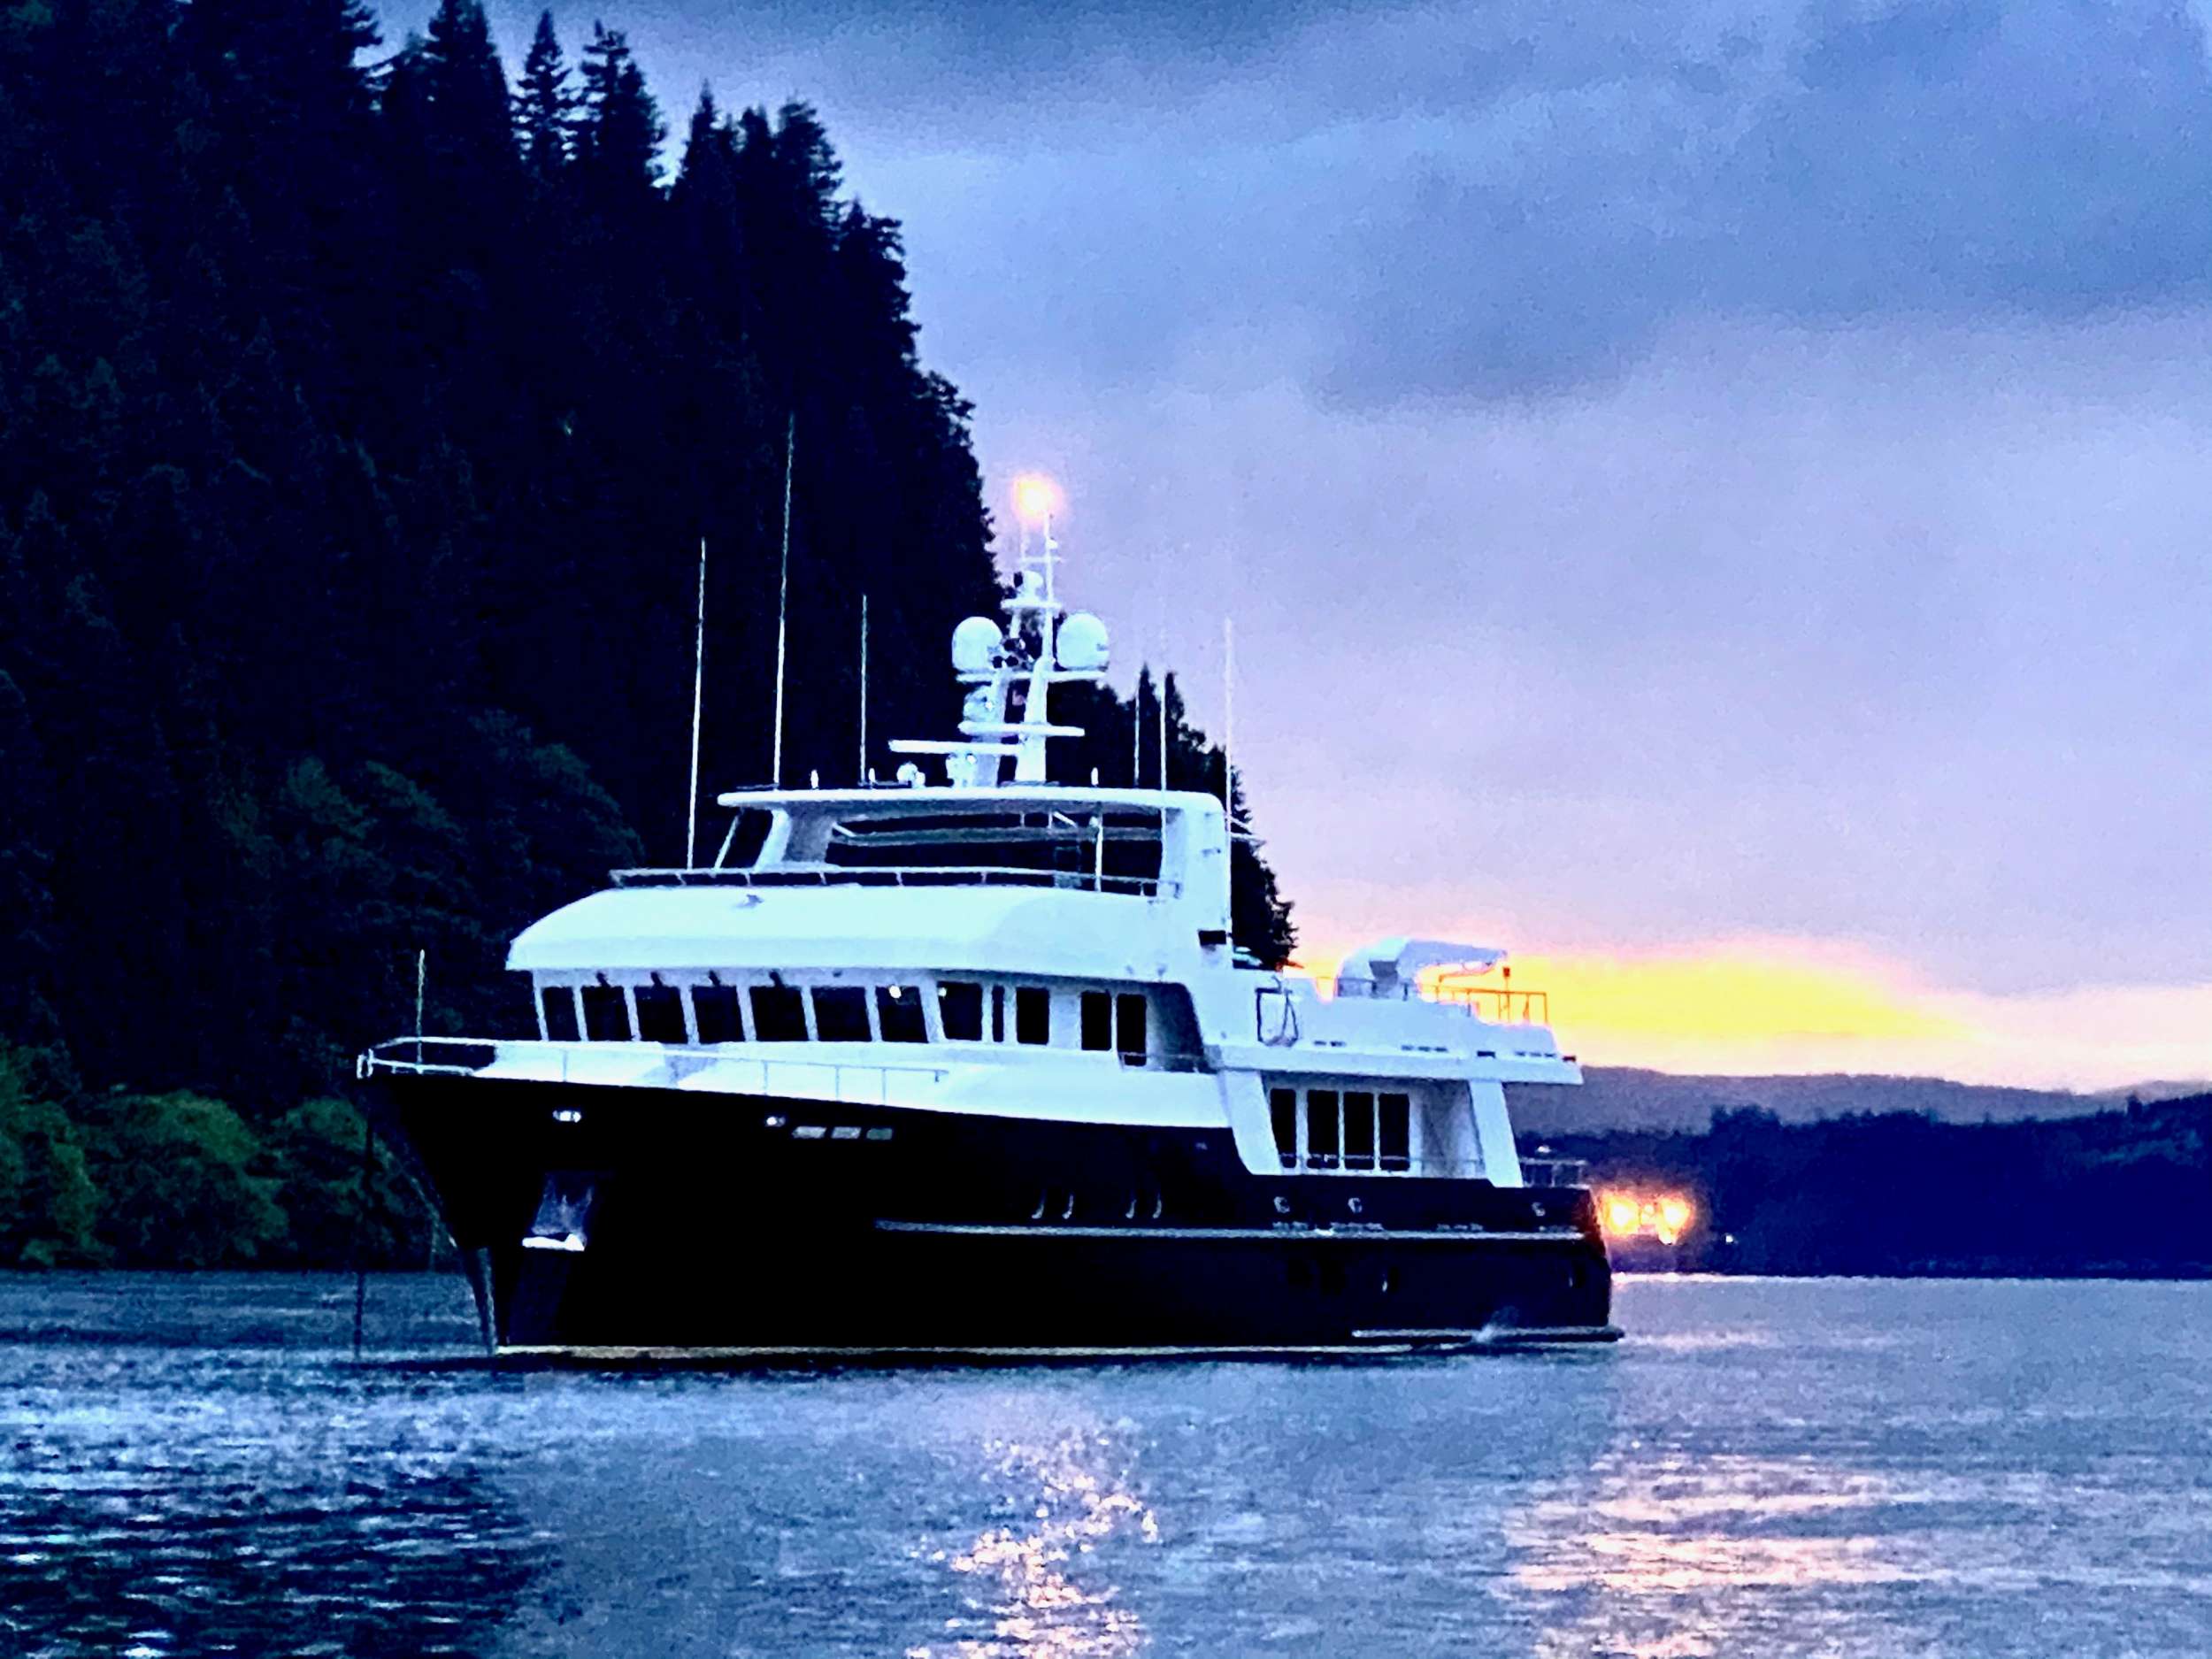 99ft Maxi Marine Group motor yacht Samsara operates in the US West Coast, Alaska, California, Pacific NW and Central America